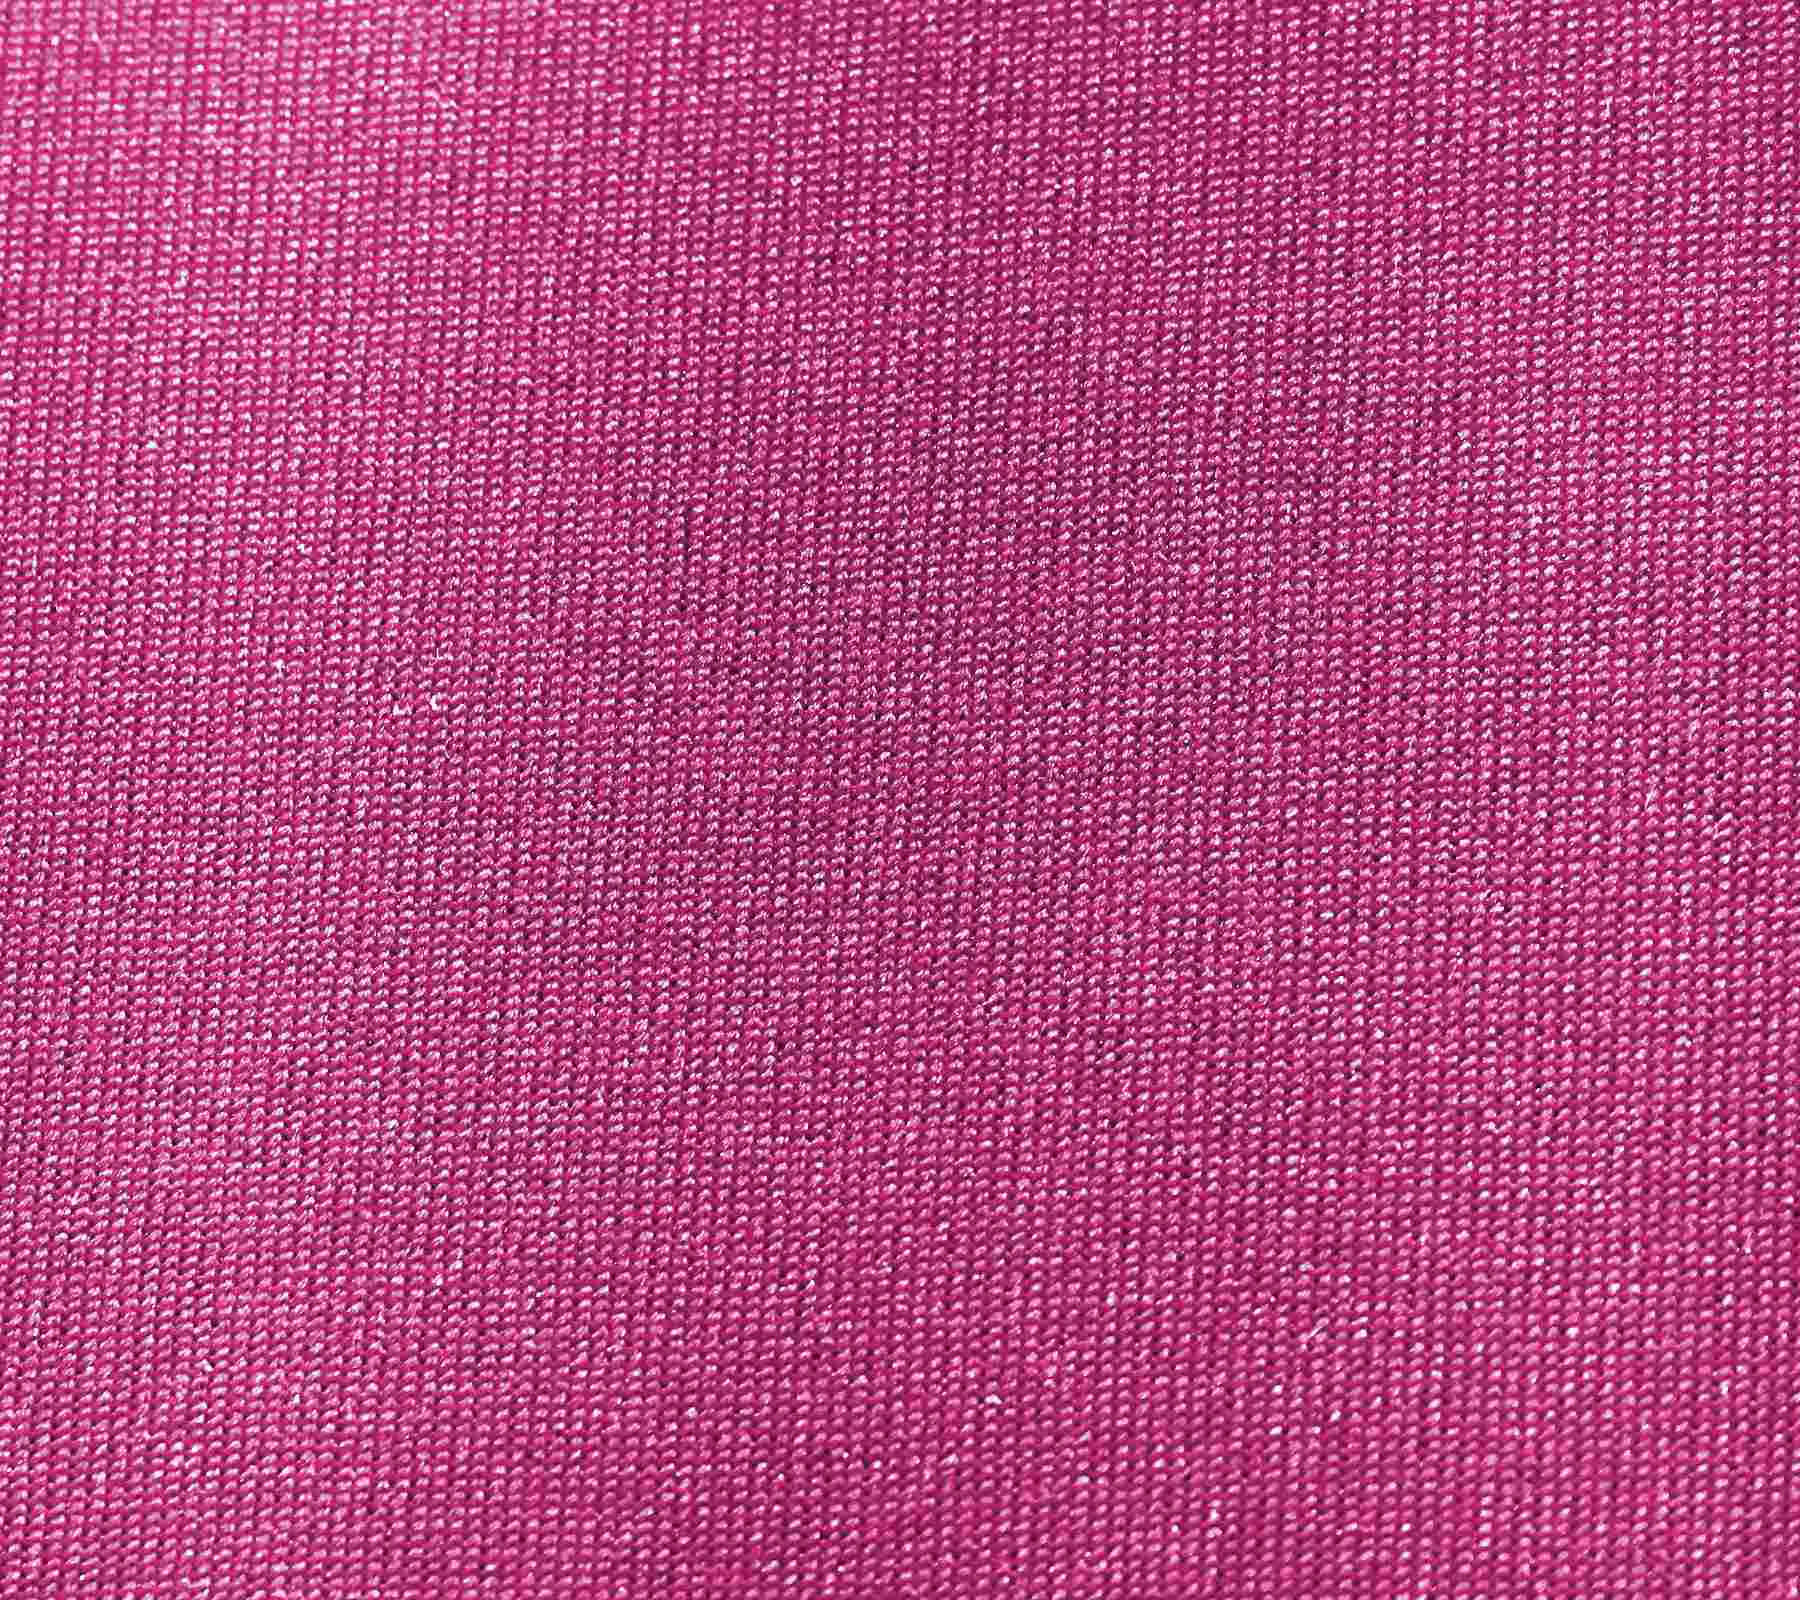 Hot Pink Woven Nylon Fabric Background Image Wallpaper or Texture